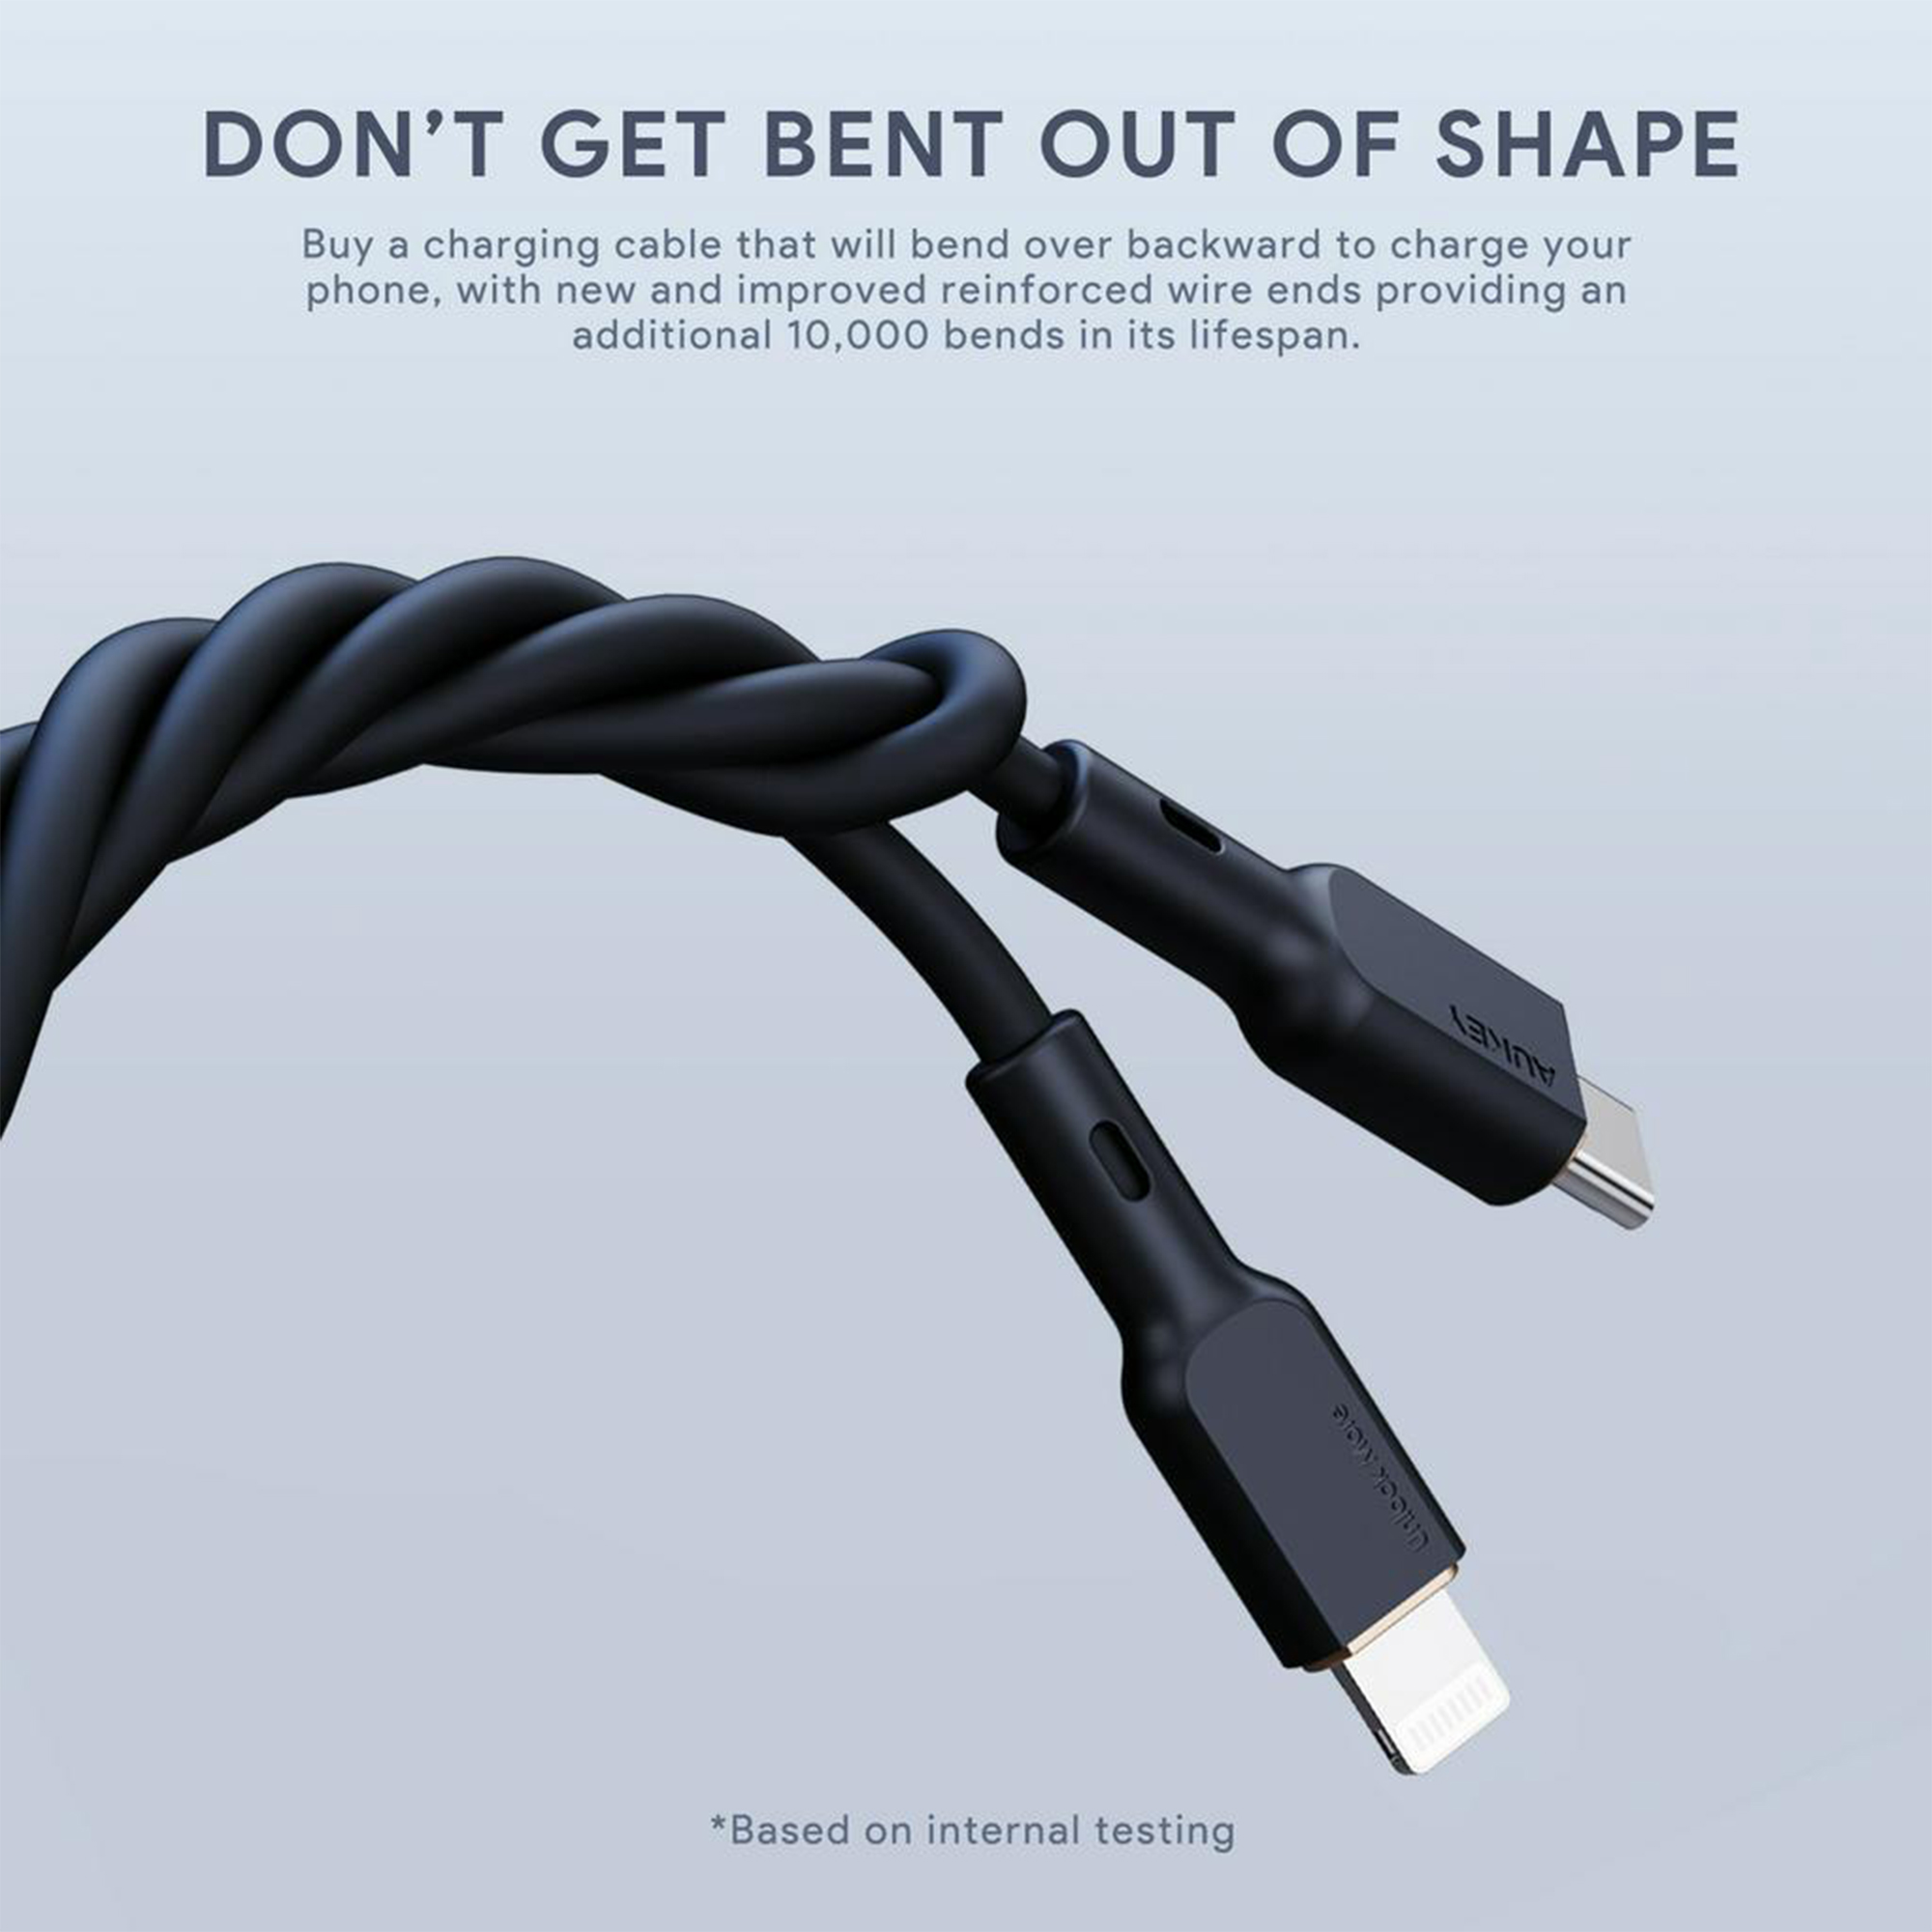 Aukey-CB-SCL1-Soft-Silicone-USB-C-to-Lightning-Cable-1-Meter-Black-Description-1